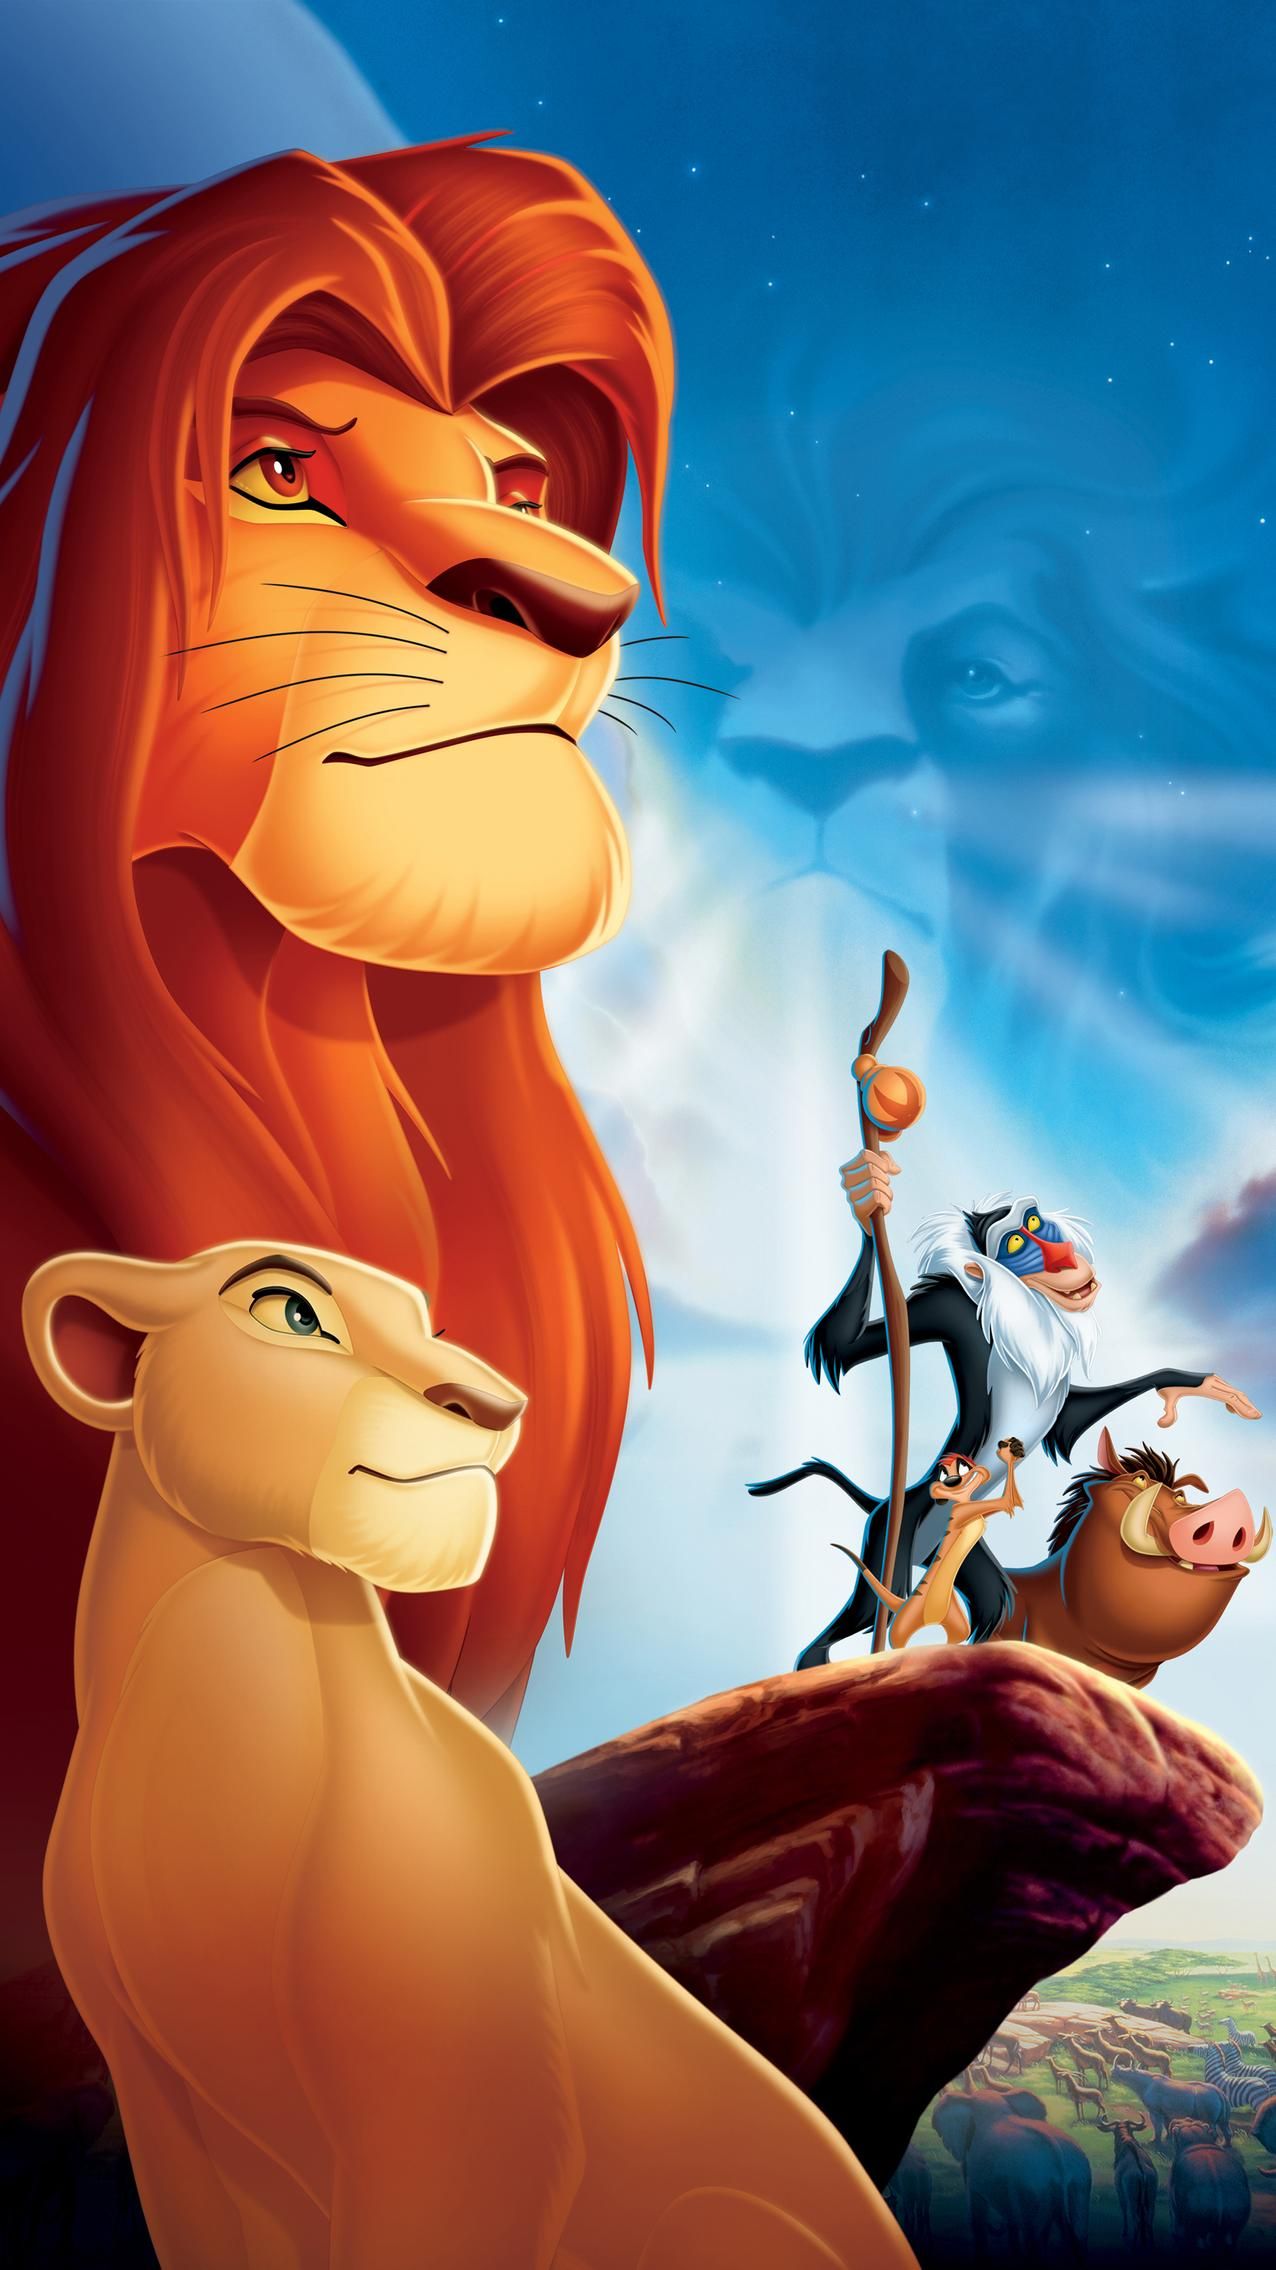 The Lion King (1994) Phone Wallpaper. Moviemania. The lion king Lion king picture, Lion king poster